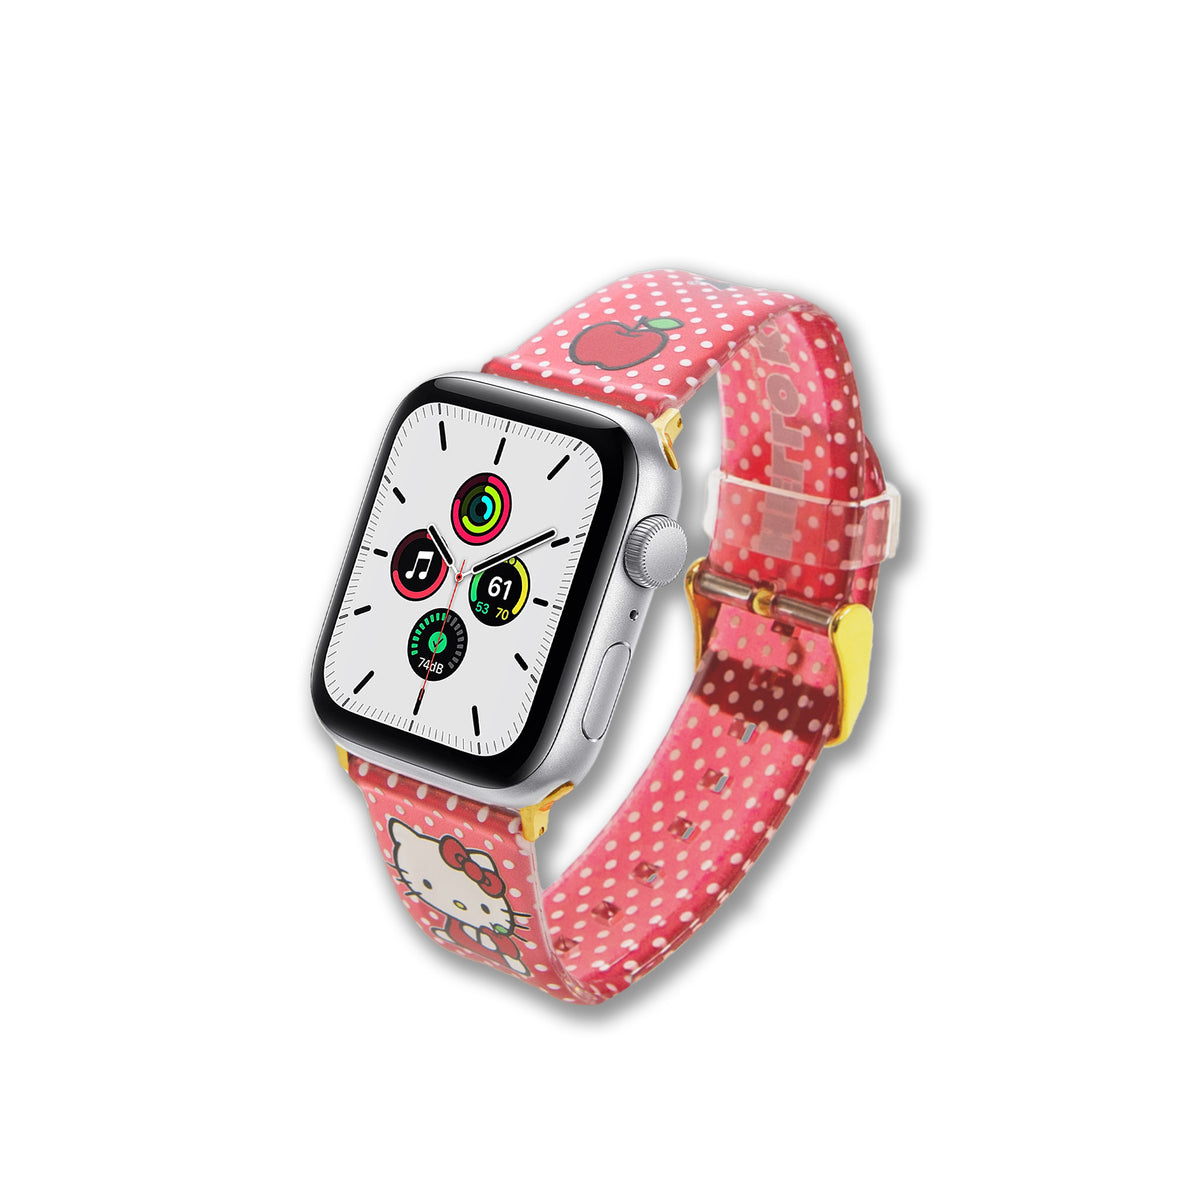 Silicone Apple Watch Band - Neon Pink – Sonix